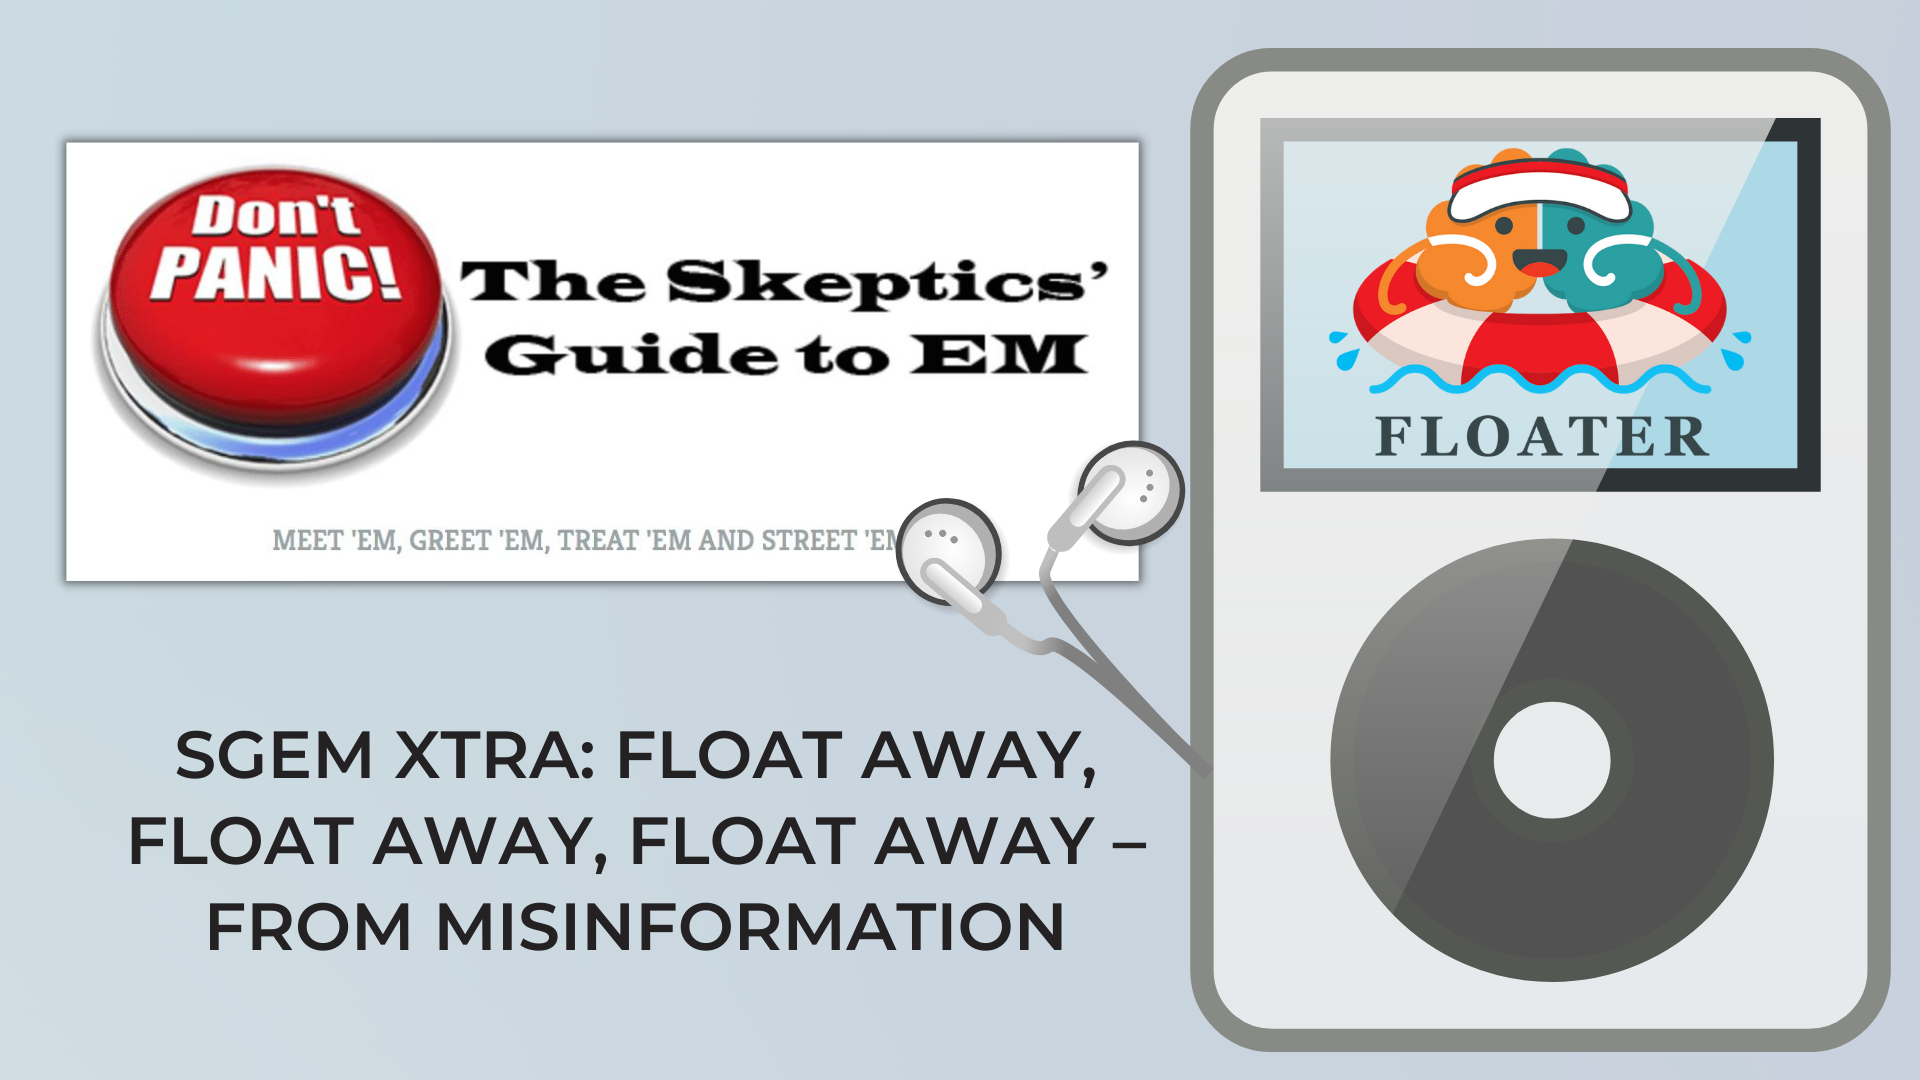 Melanie Trecek-King from Thinking Is Power is on the Skeptics' Guide to Emergency Medicine with Ken Milne discussing FLOATER; Float away from misinformation